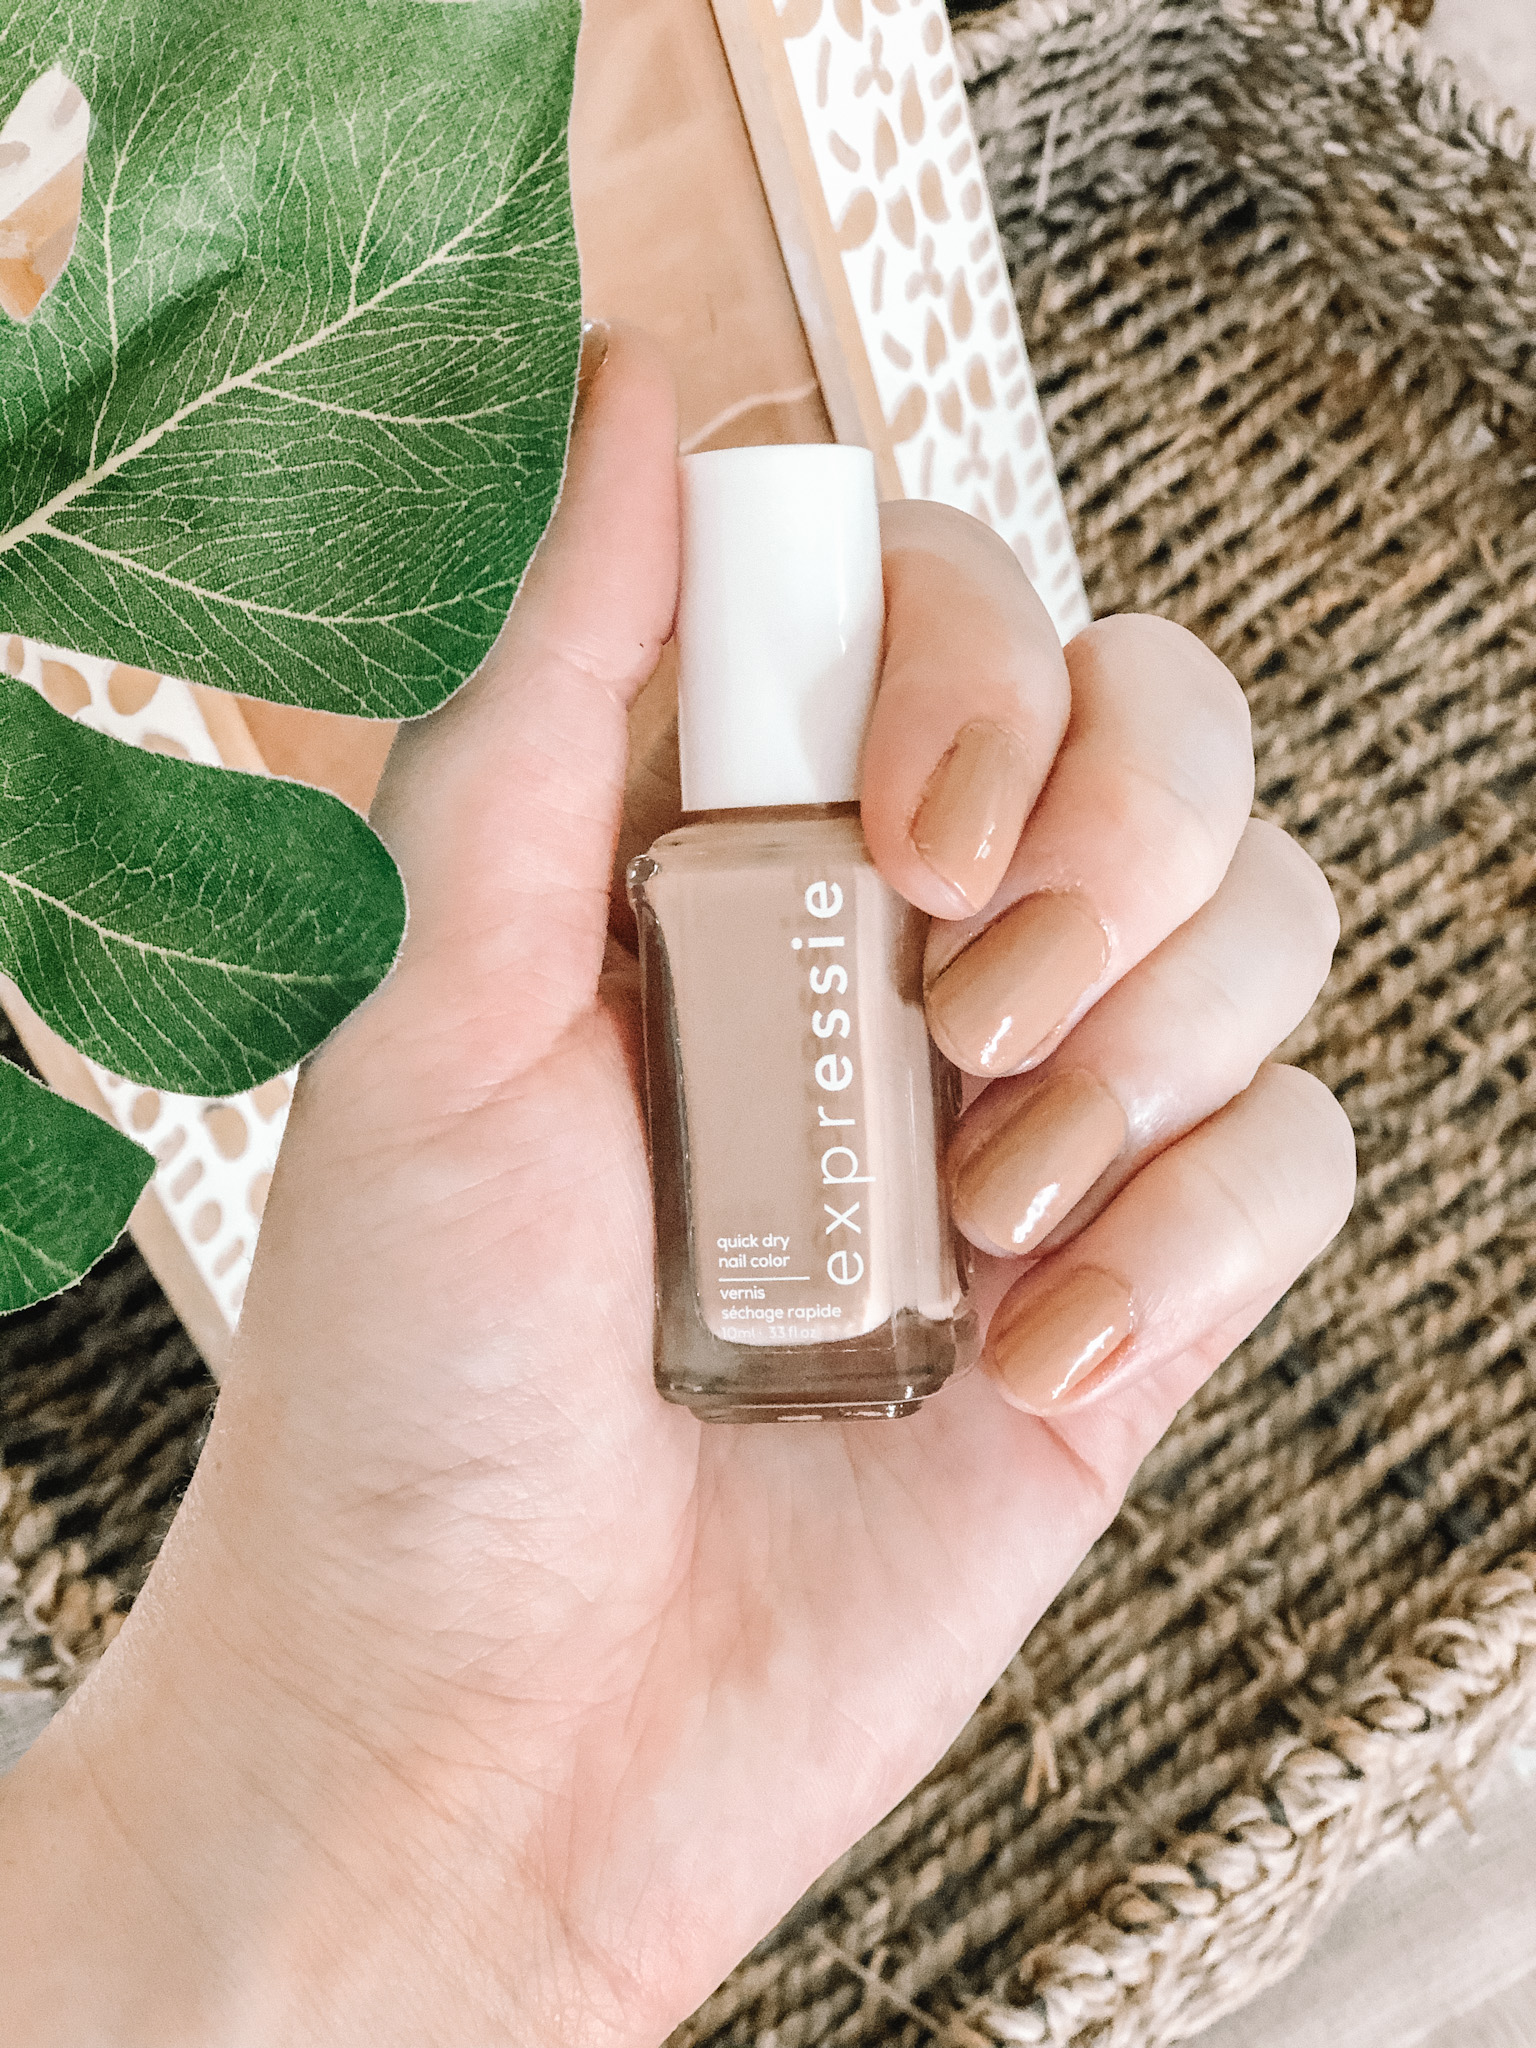 How to Give Yourself a Manicure at Home. Florida style blogger Amanda Burrows of the blog Affordable by Amanda shares her tips for achieving the perfect manicure at home. essie Base Coat Nail Polish, essie expressie Quick-Dry Nail Polish, essie good to go top coat.